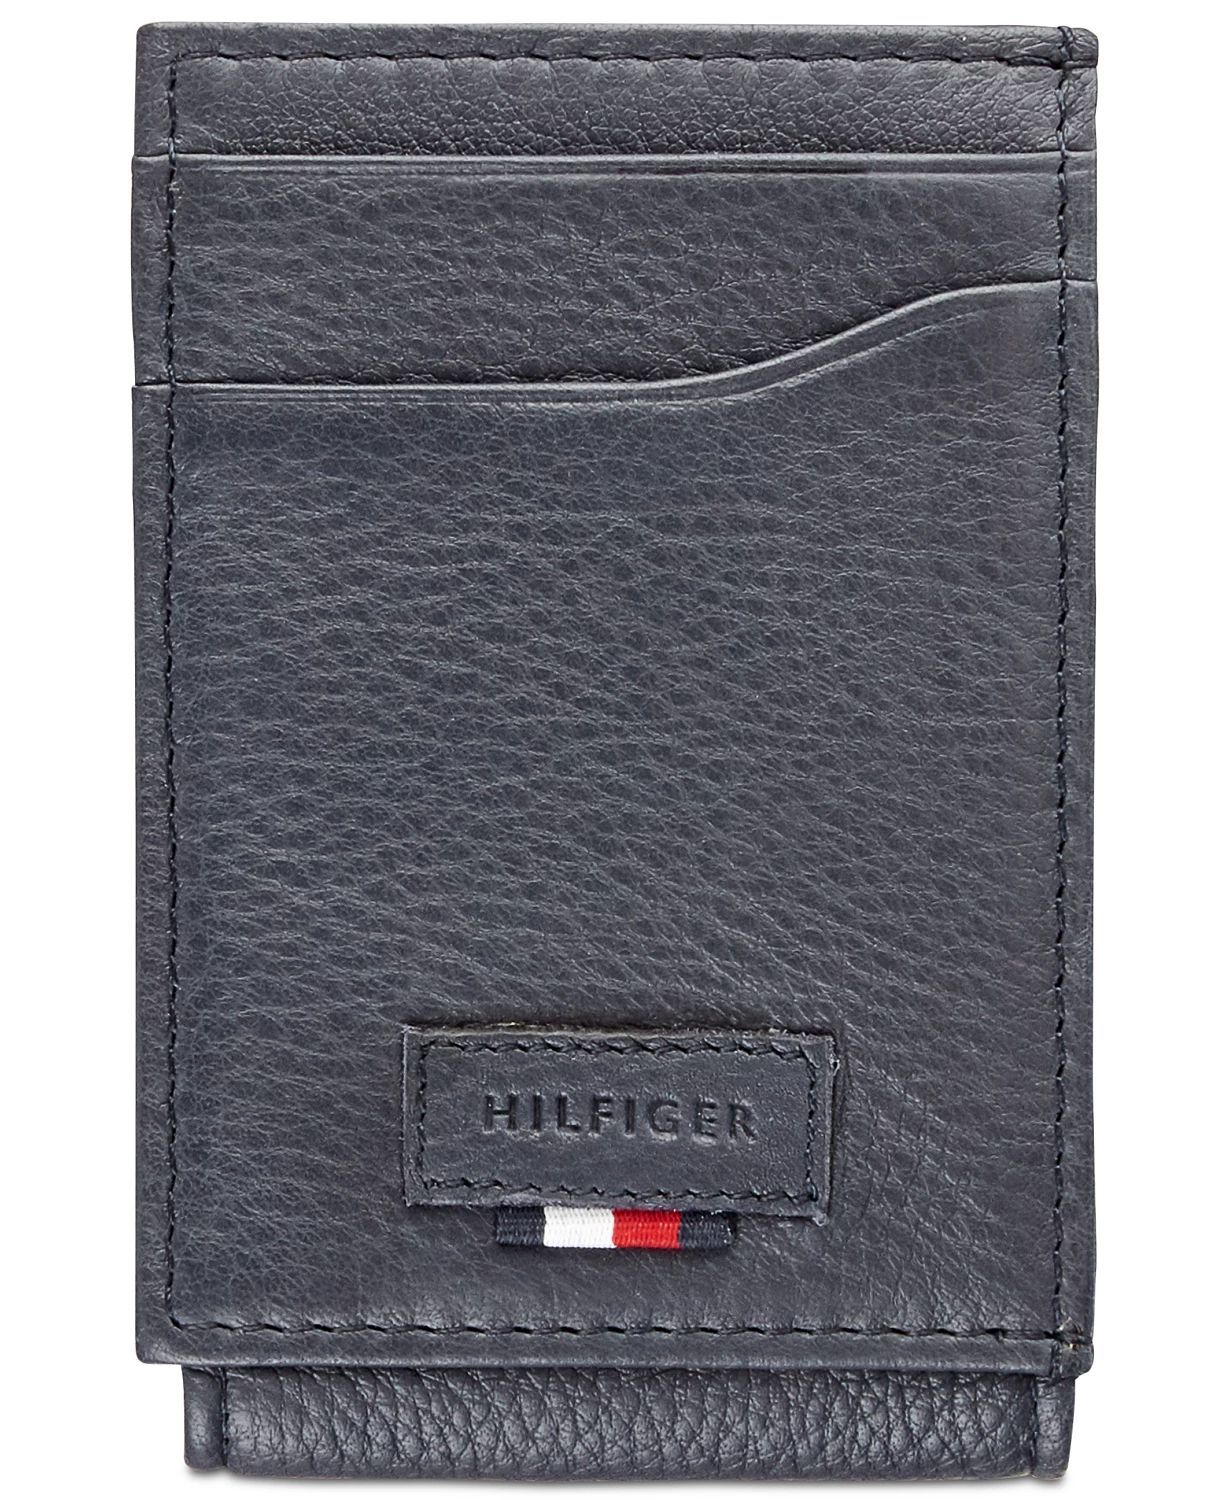 Color: Blues Style: Bifold Material: Leather